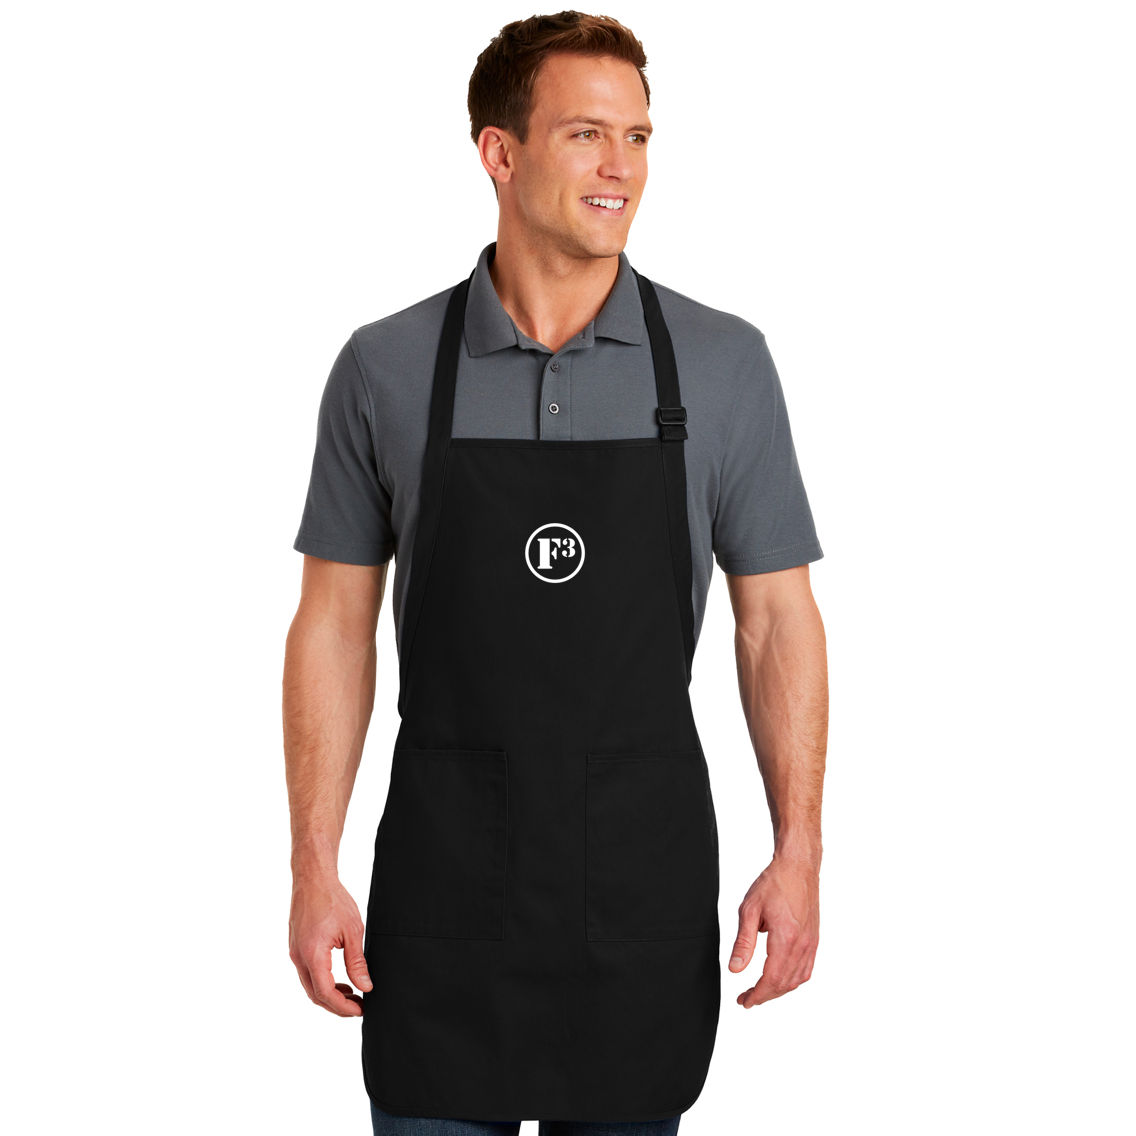 F3 Port Authority Full-Length Apron with Pockets - Made to Order